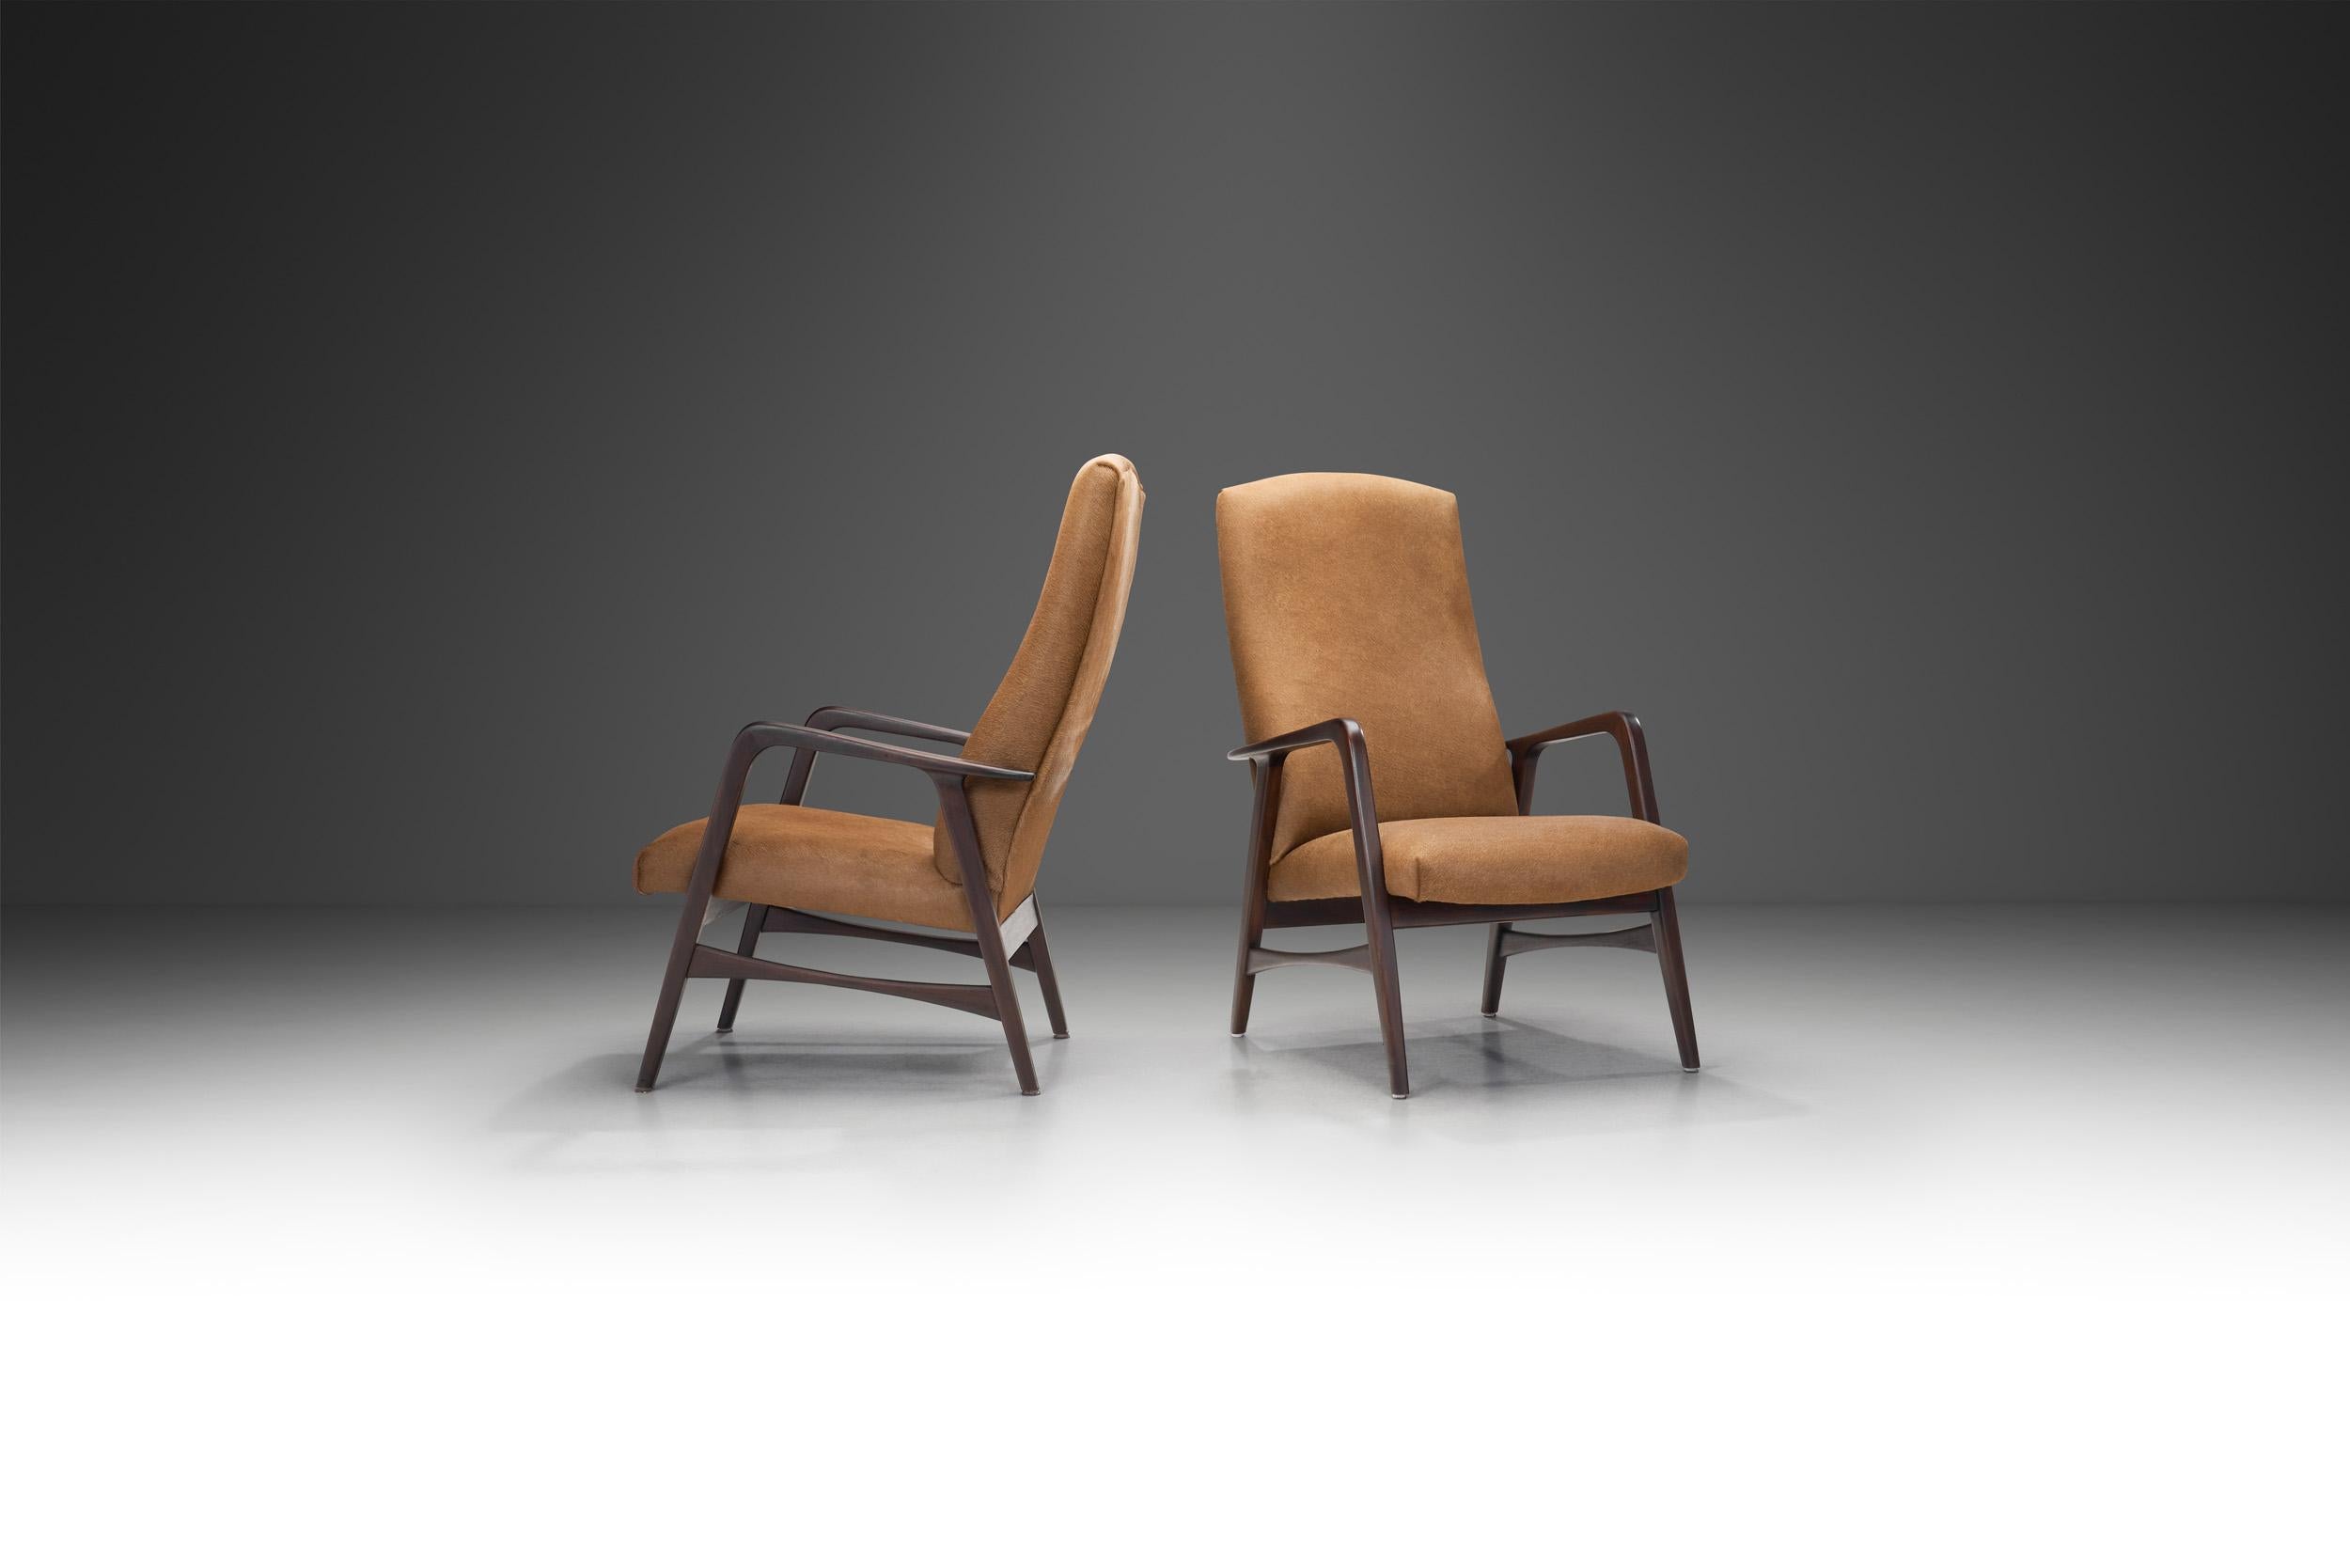 Mid-20th Century Danish Modern Lounge Chairs in Brown Cowhide, Denmark 1960s For Sale